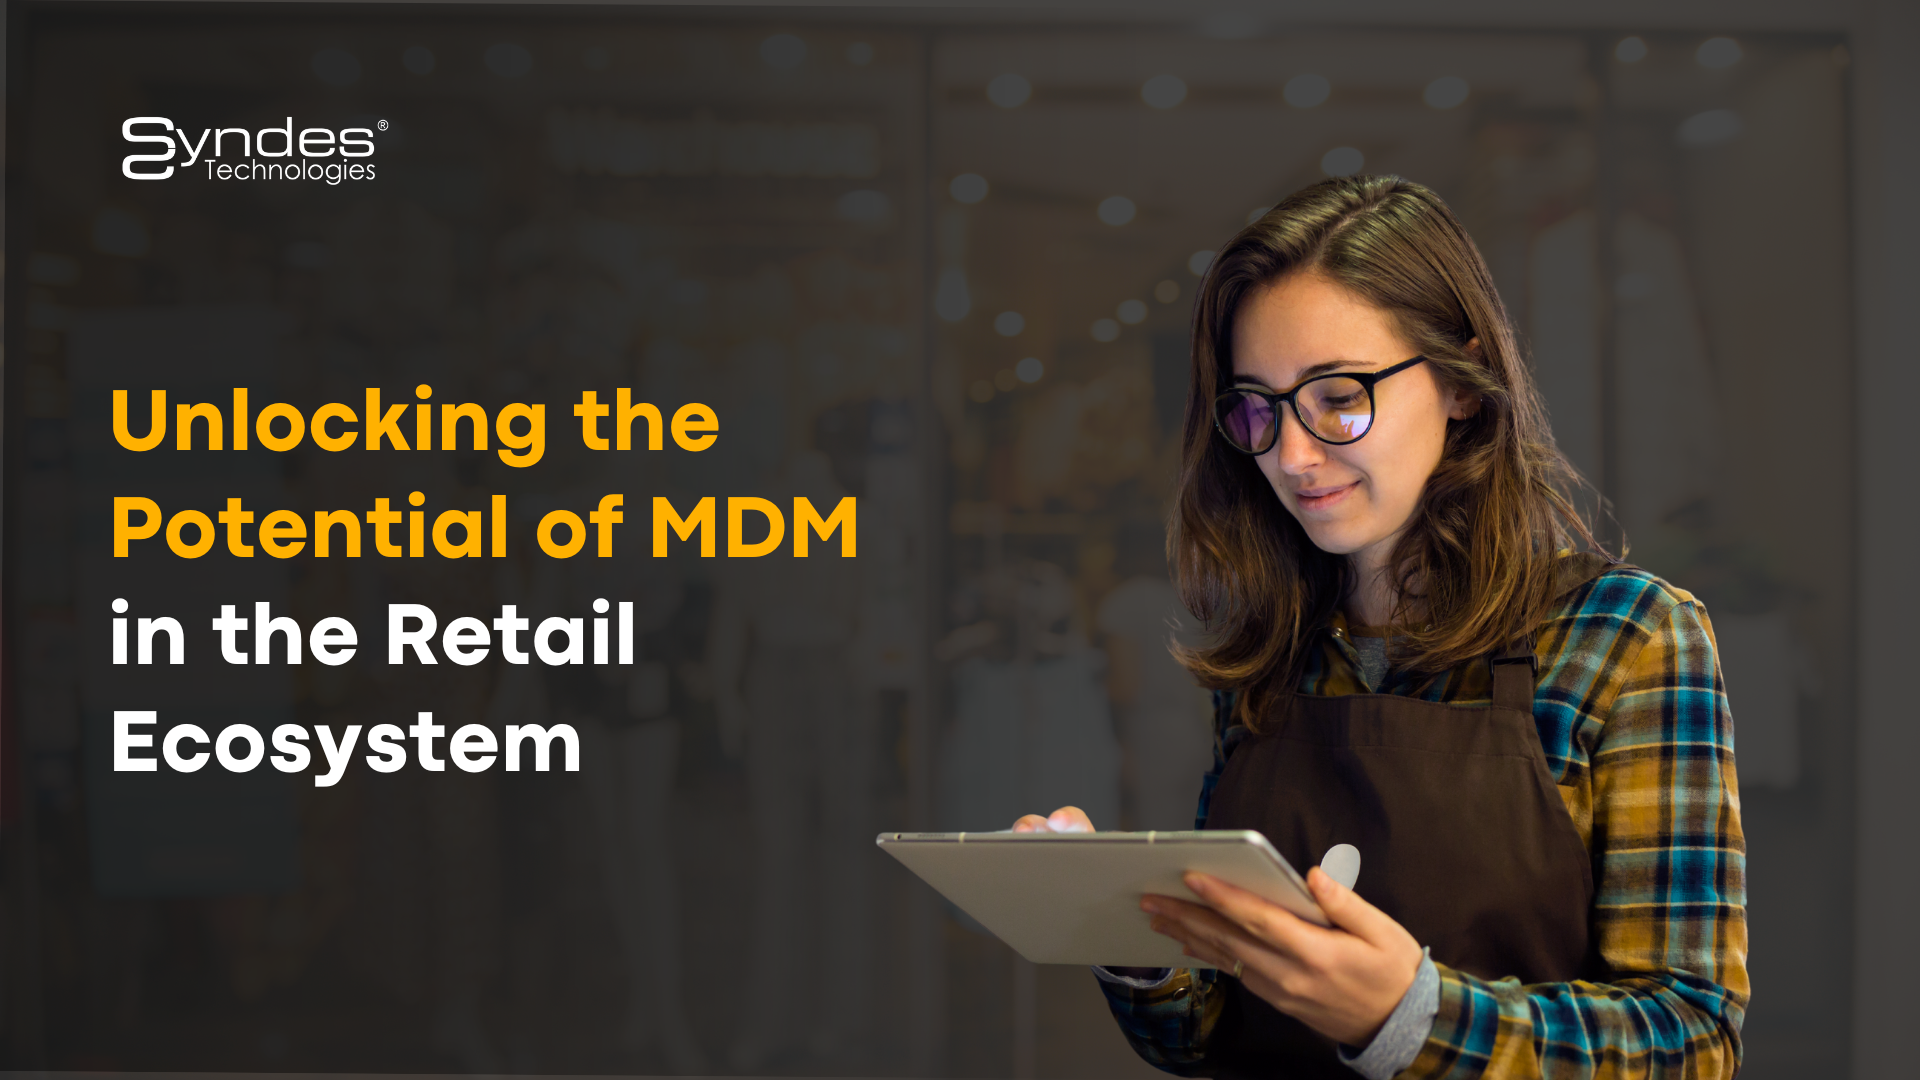 Unlocking the Potential of MDM in the Retail Ecosystem